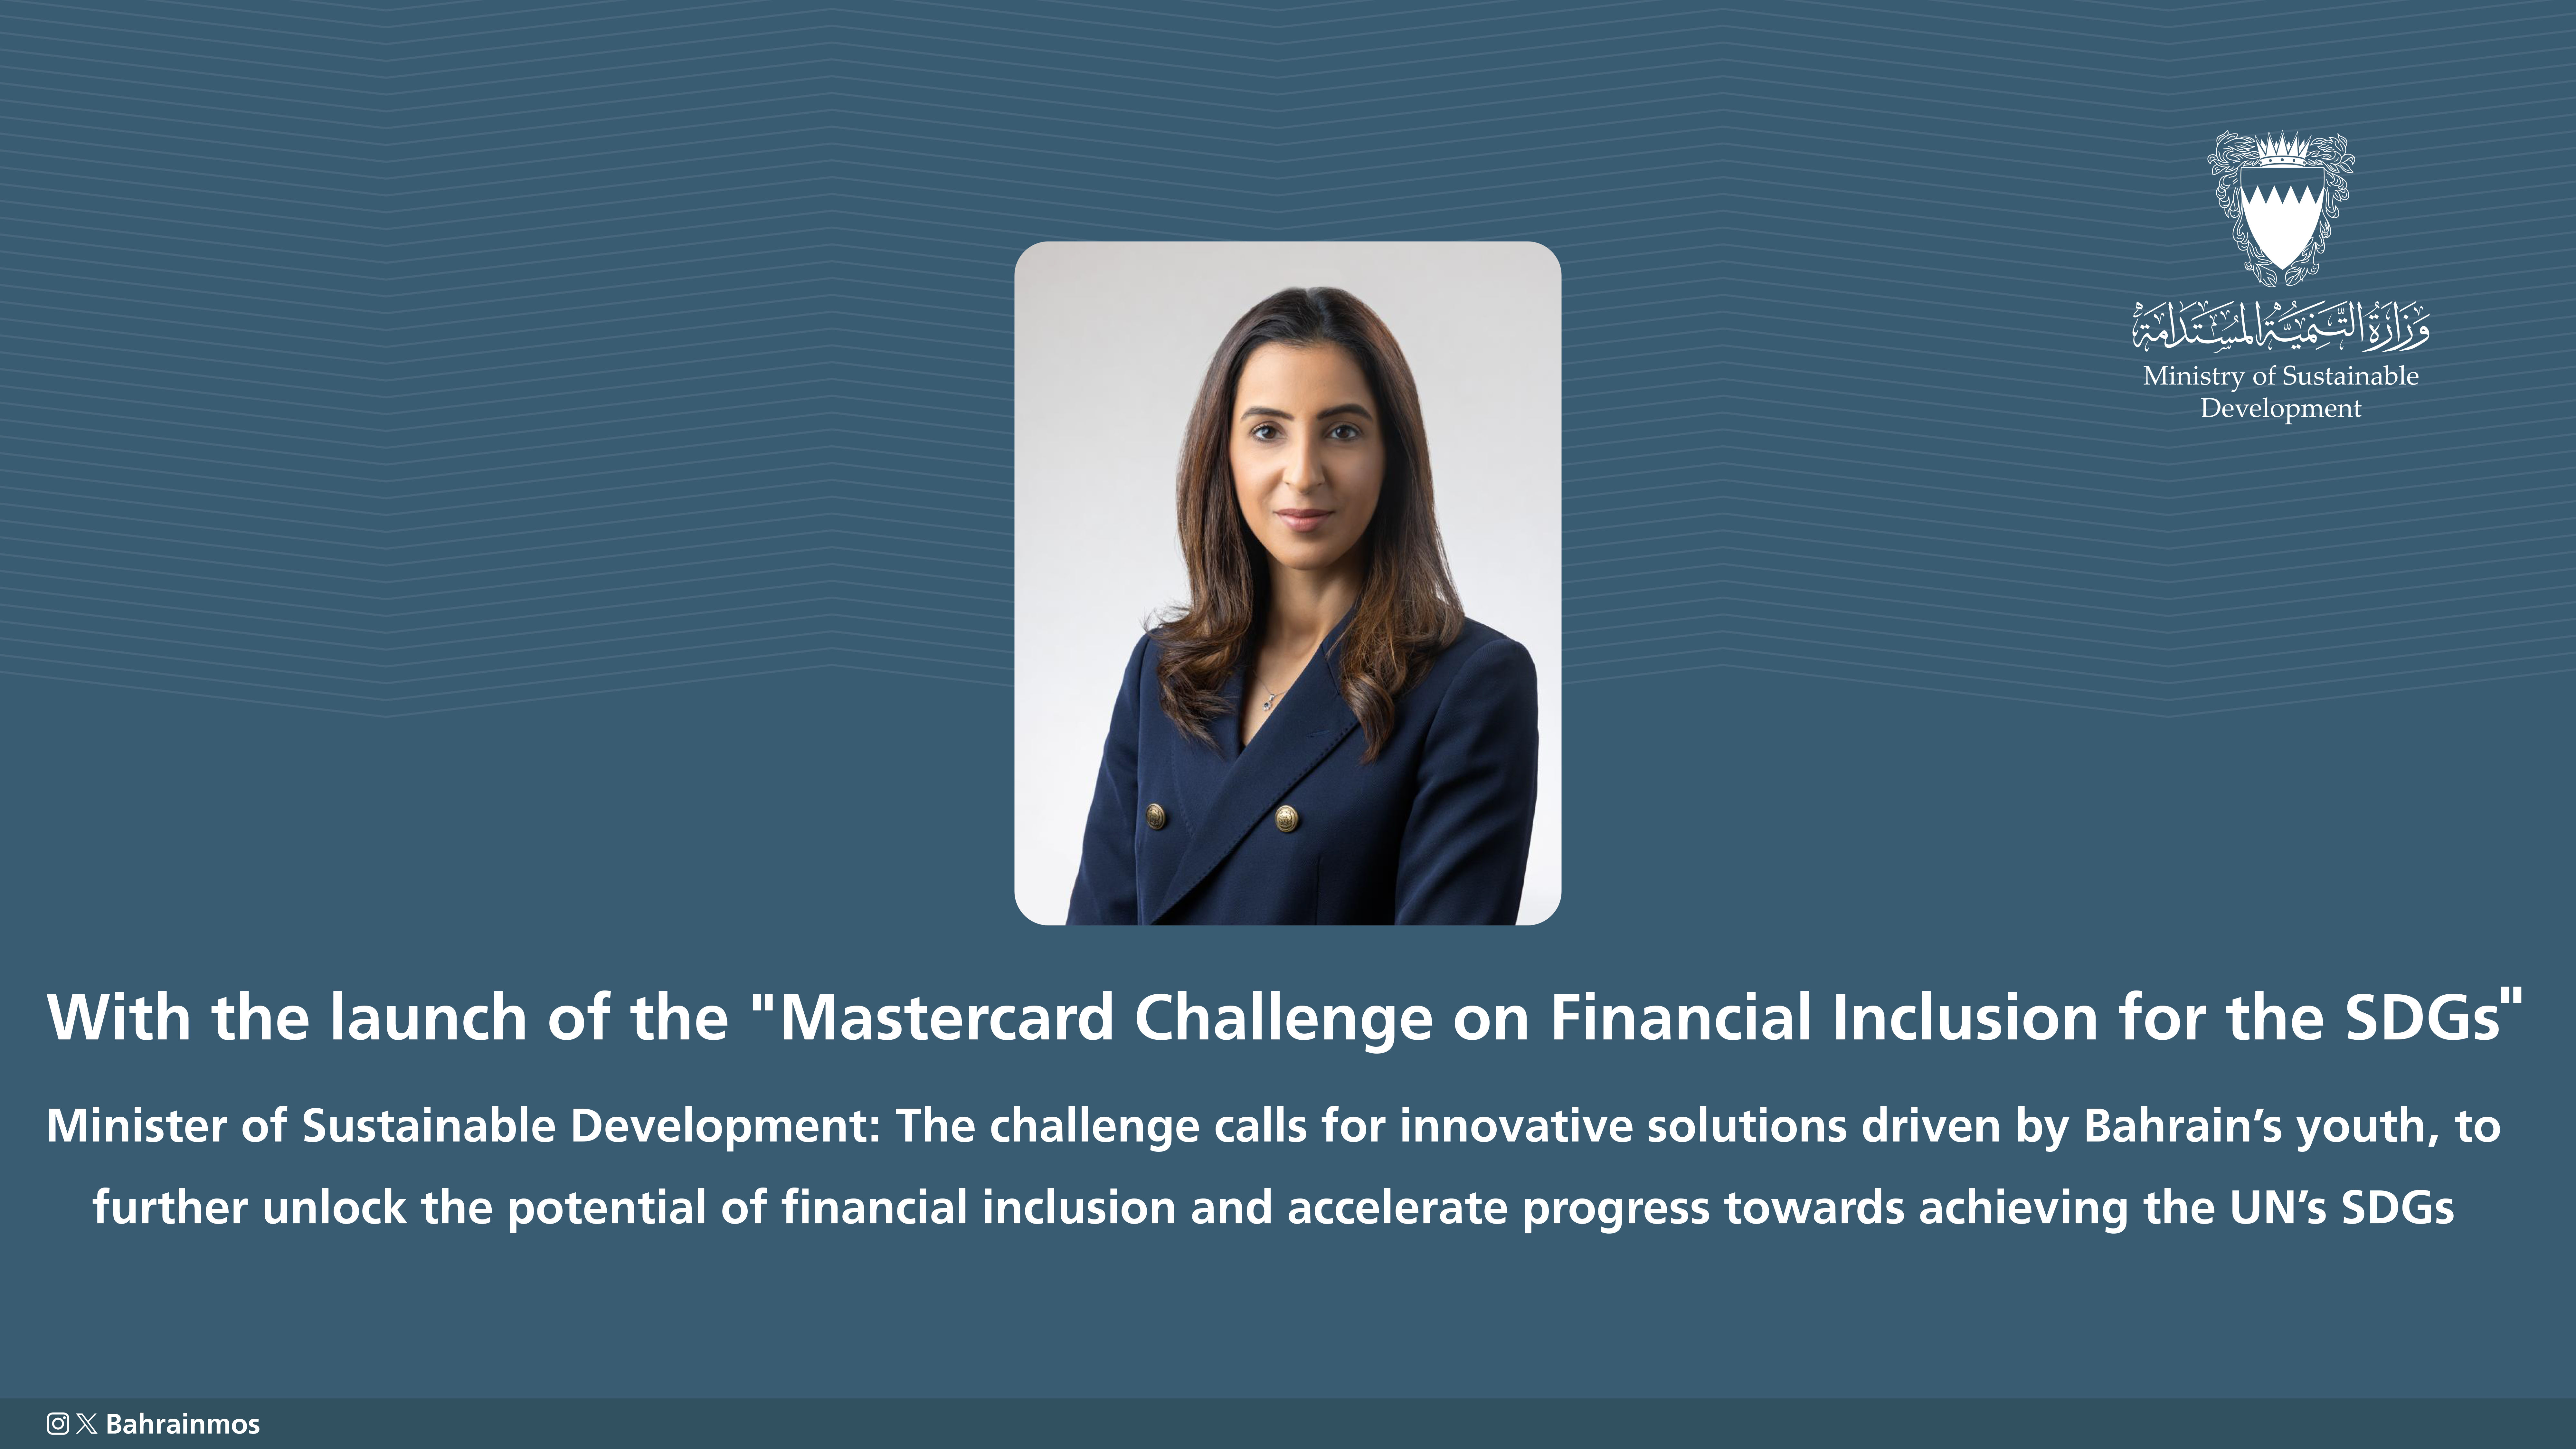 Sustainable Development Ministry, Mastercard Launch pioneering challenge for Youth-Driven Financial Inclusion Solutions